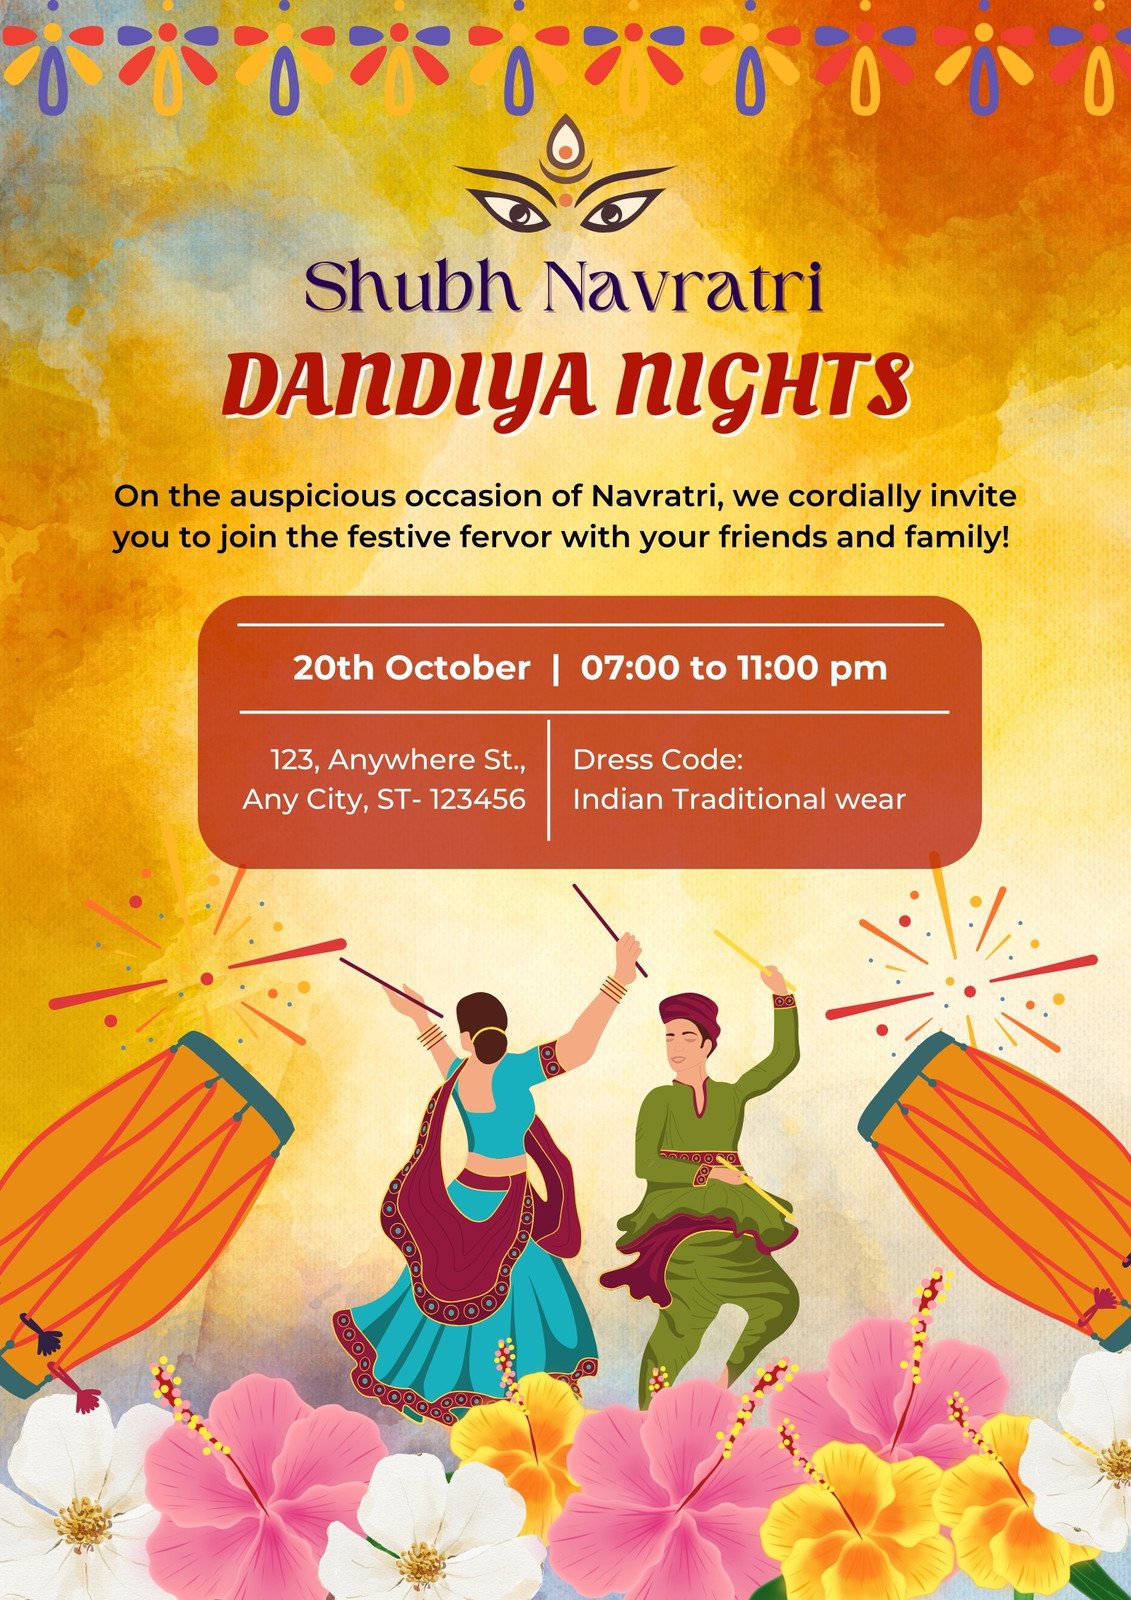 Sonis School of Garba Dance - Want to RELIVE NAVRATRI with SSGD? Join us  next Saturday for a grand evening!! 💃 Dress up traditionally to make it  much vibrant and wow! Presenting